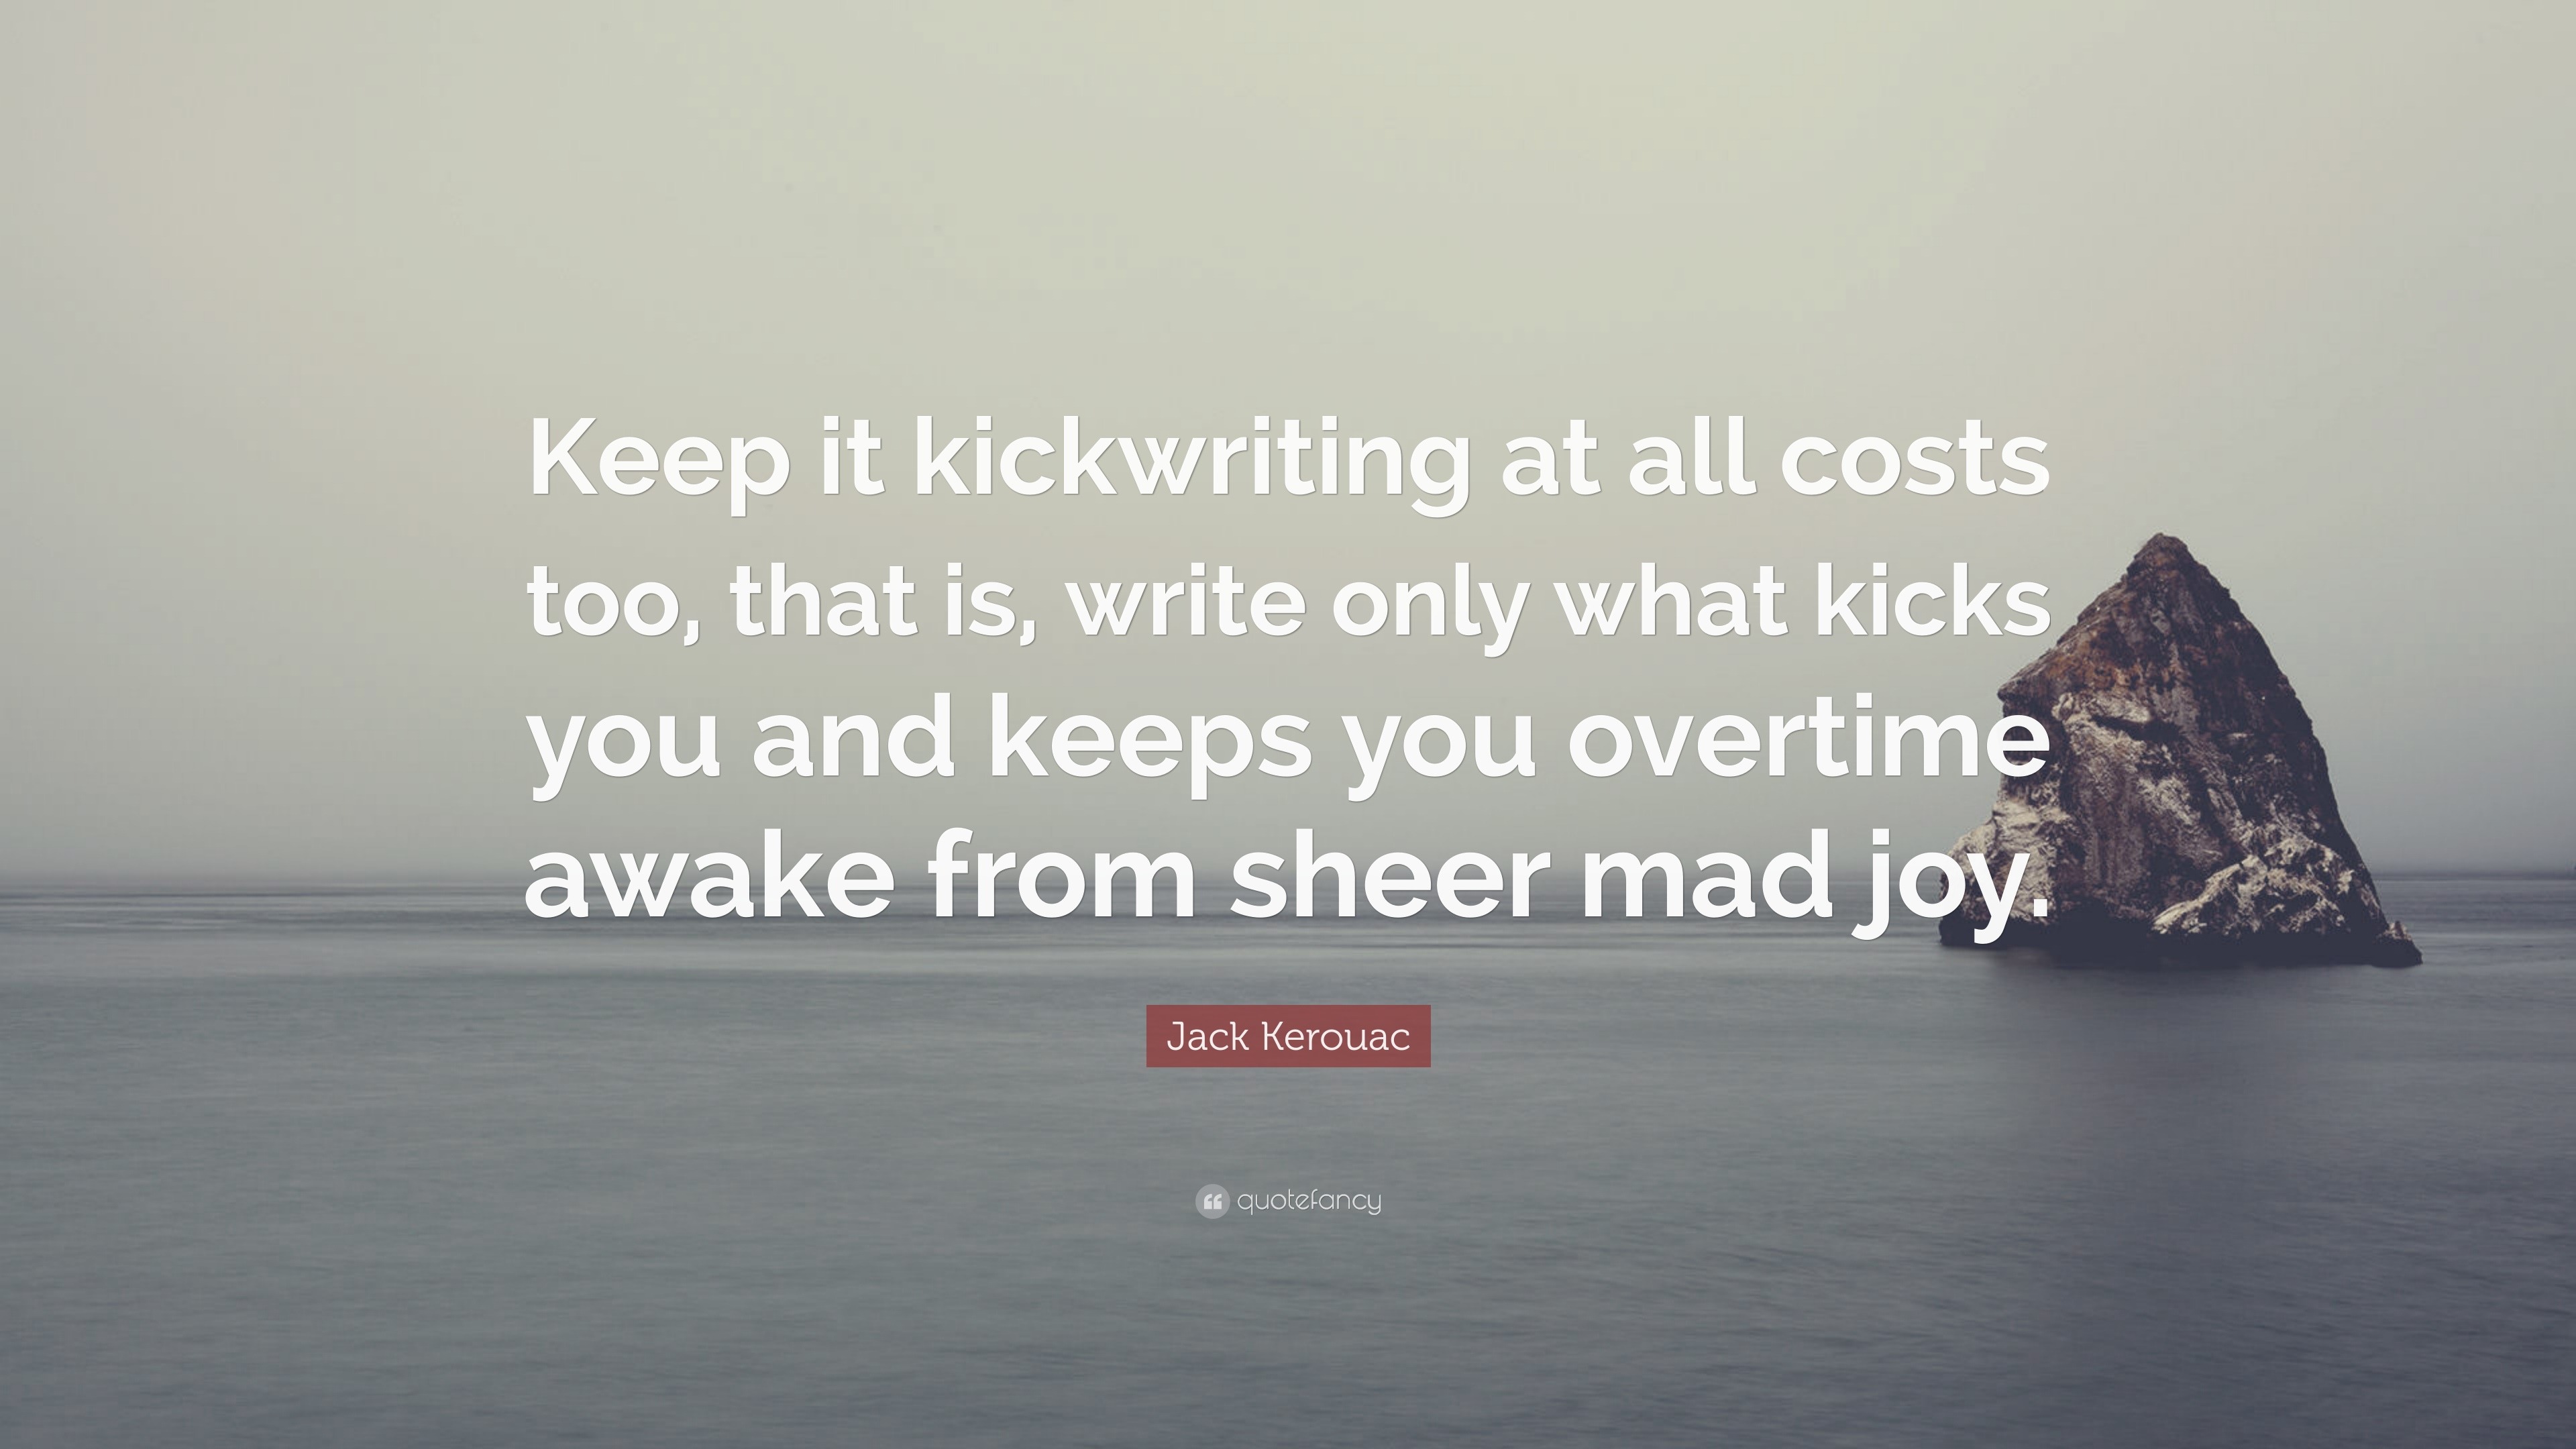 Jack Kerouac Quote: “Keep it kickwriting at all costs too, that is